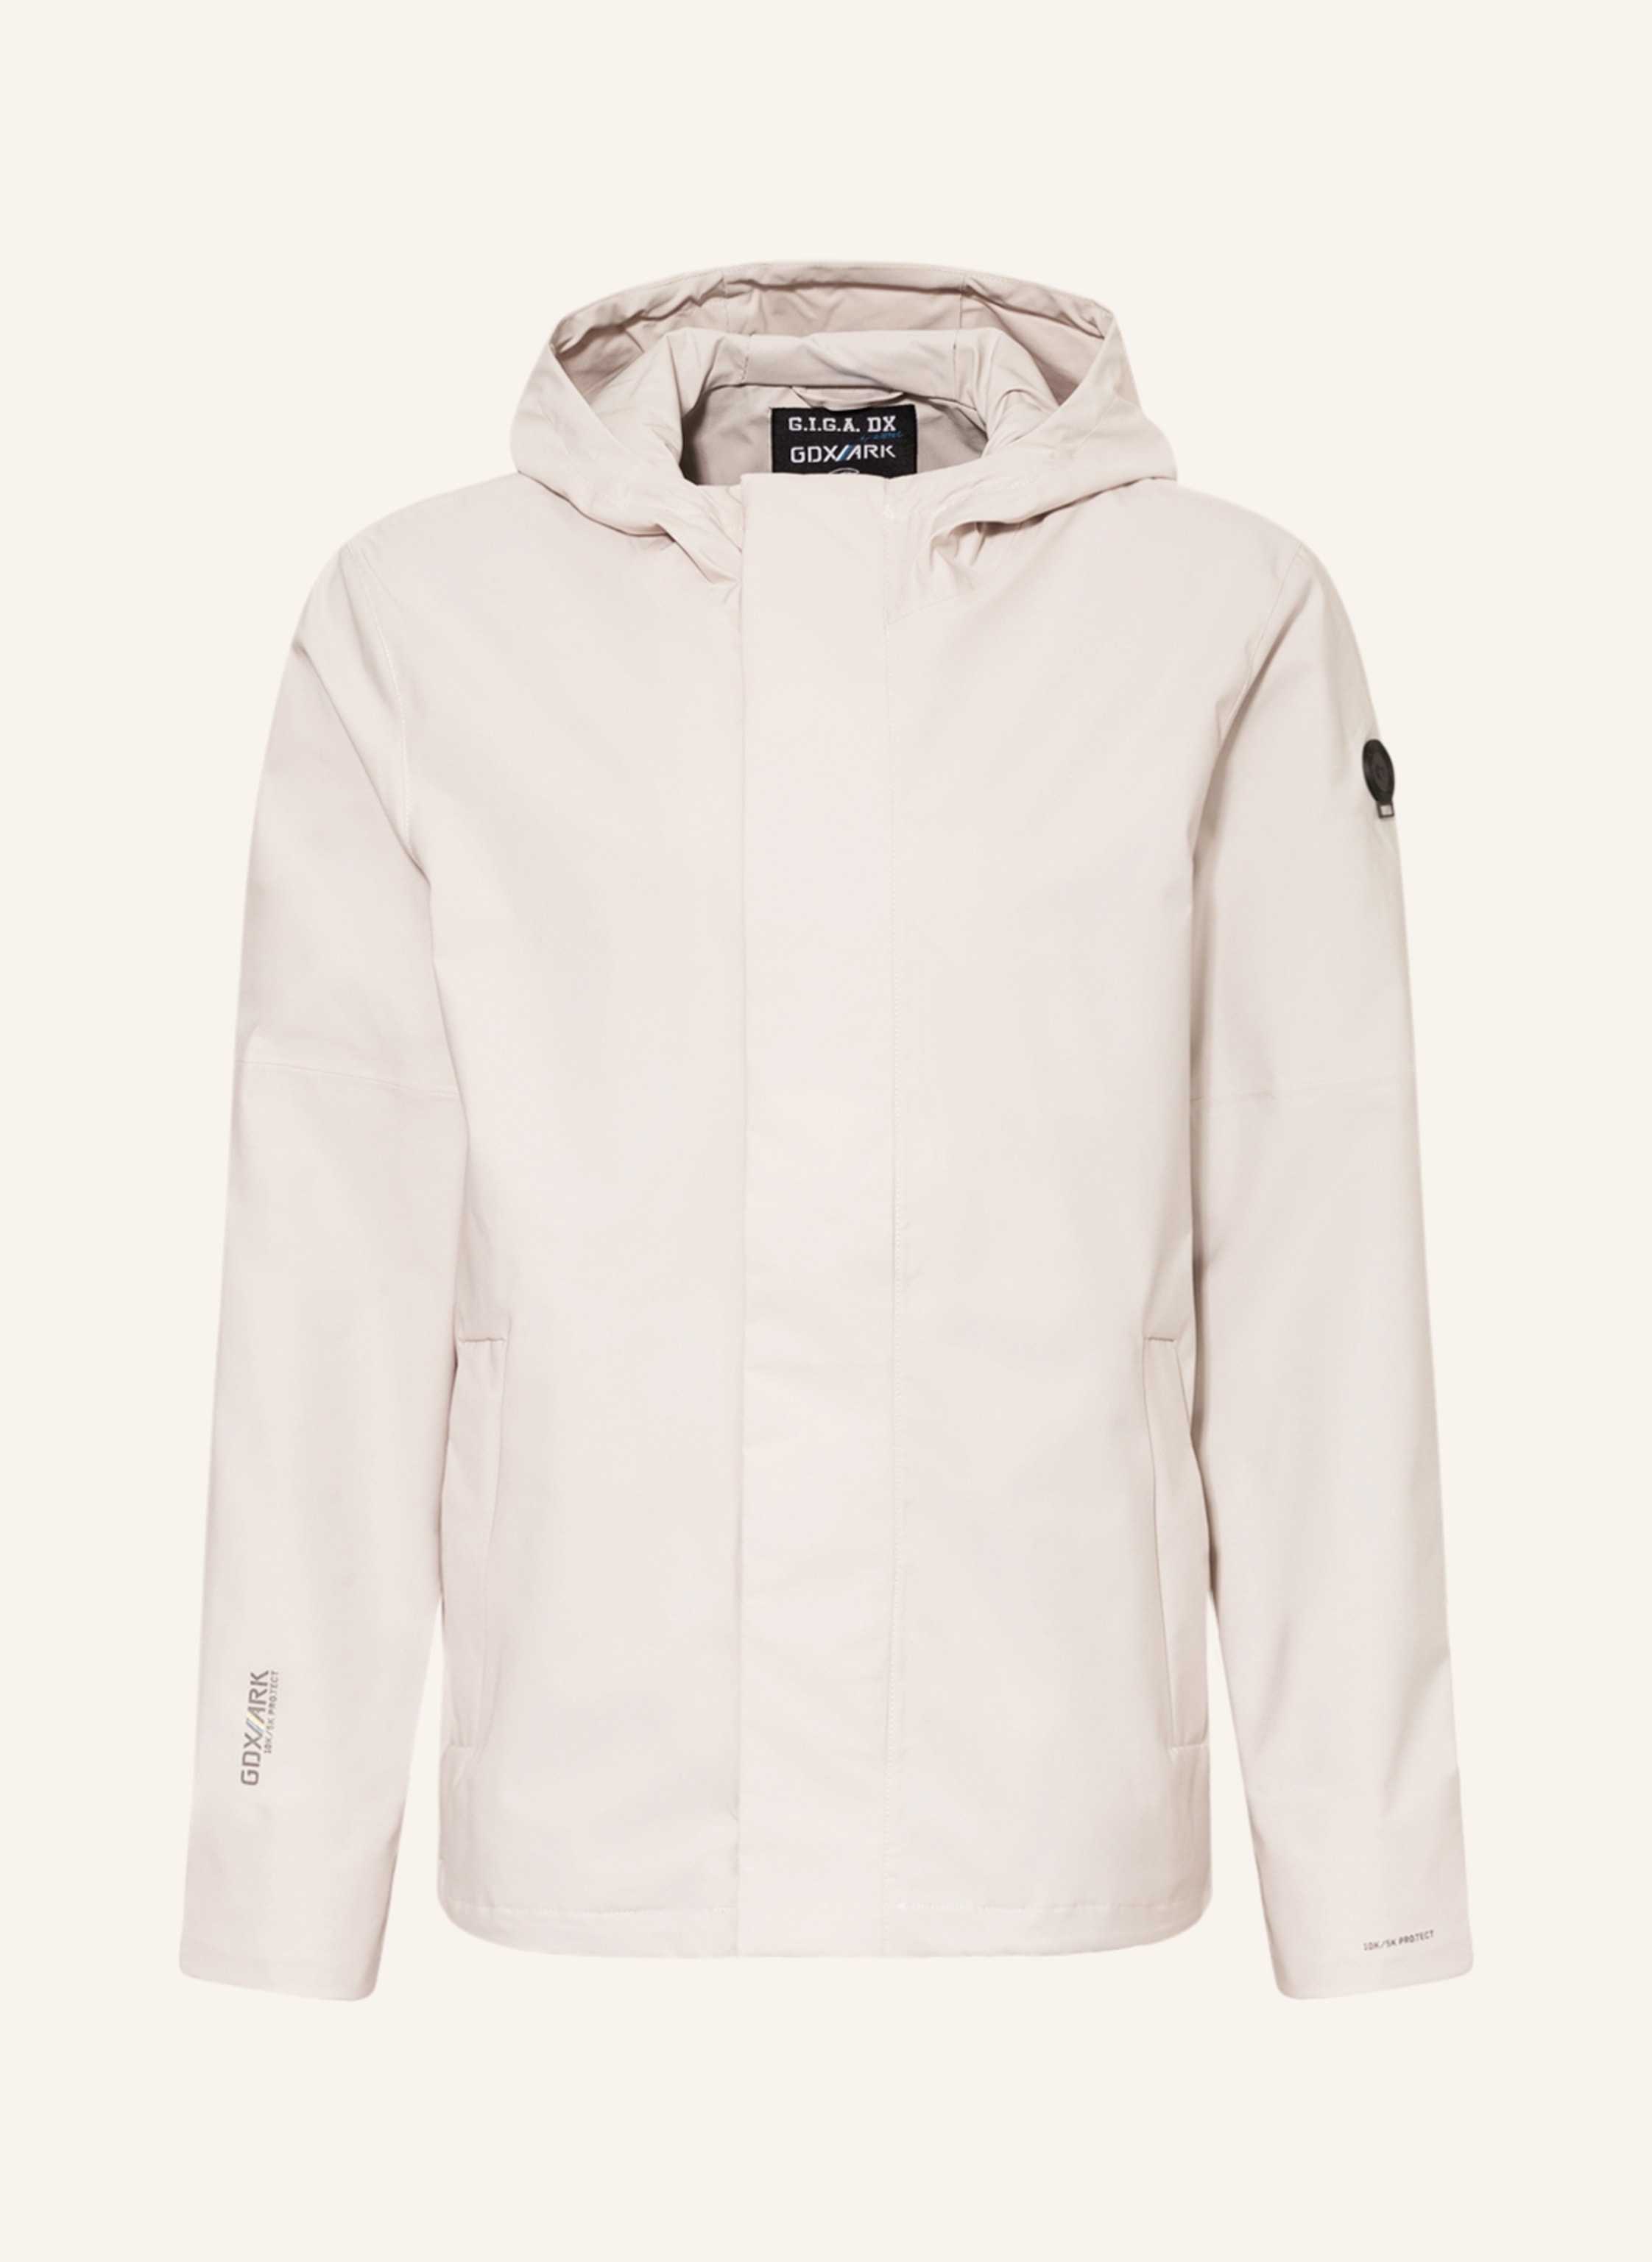 Outdoor in G.I.G.A. DX GS cream jacket killtec by 147